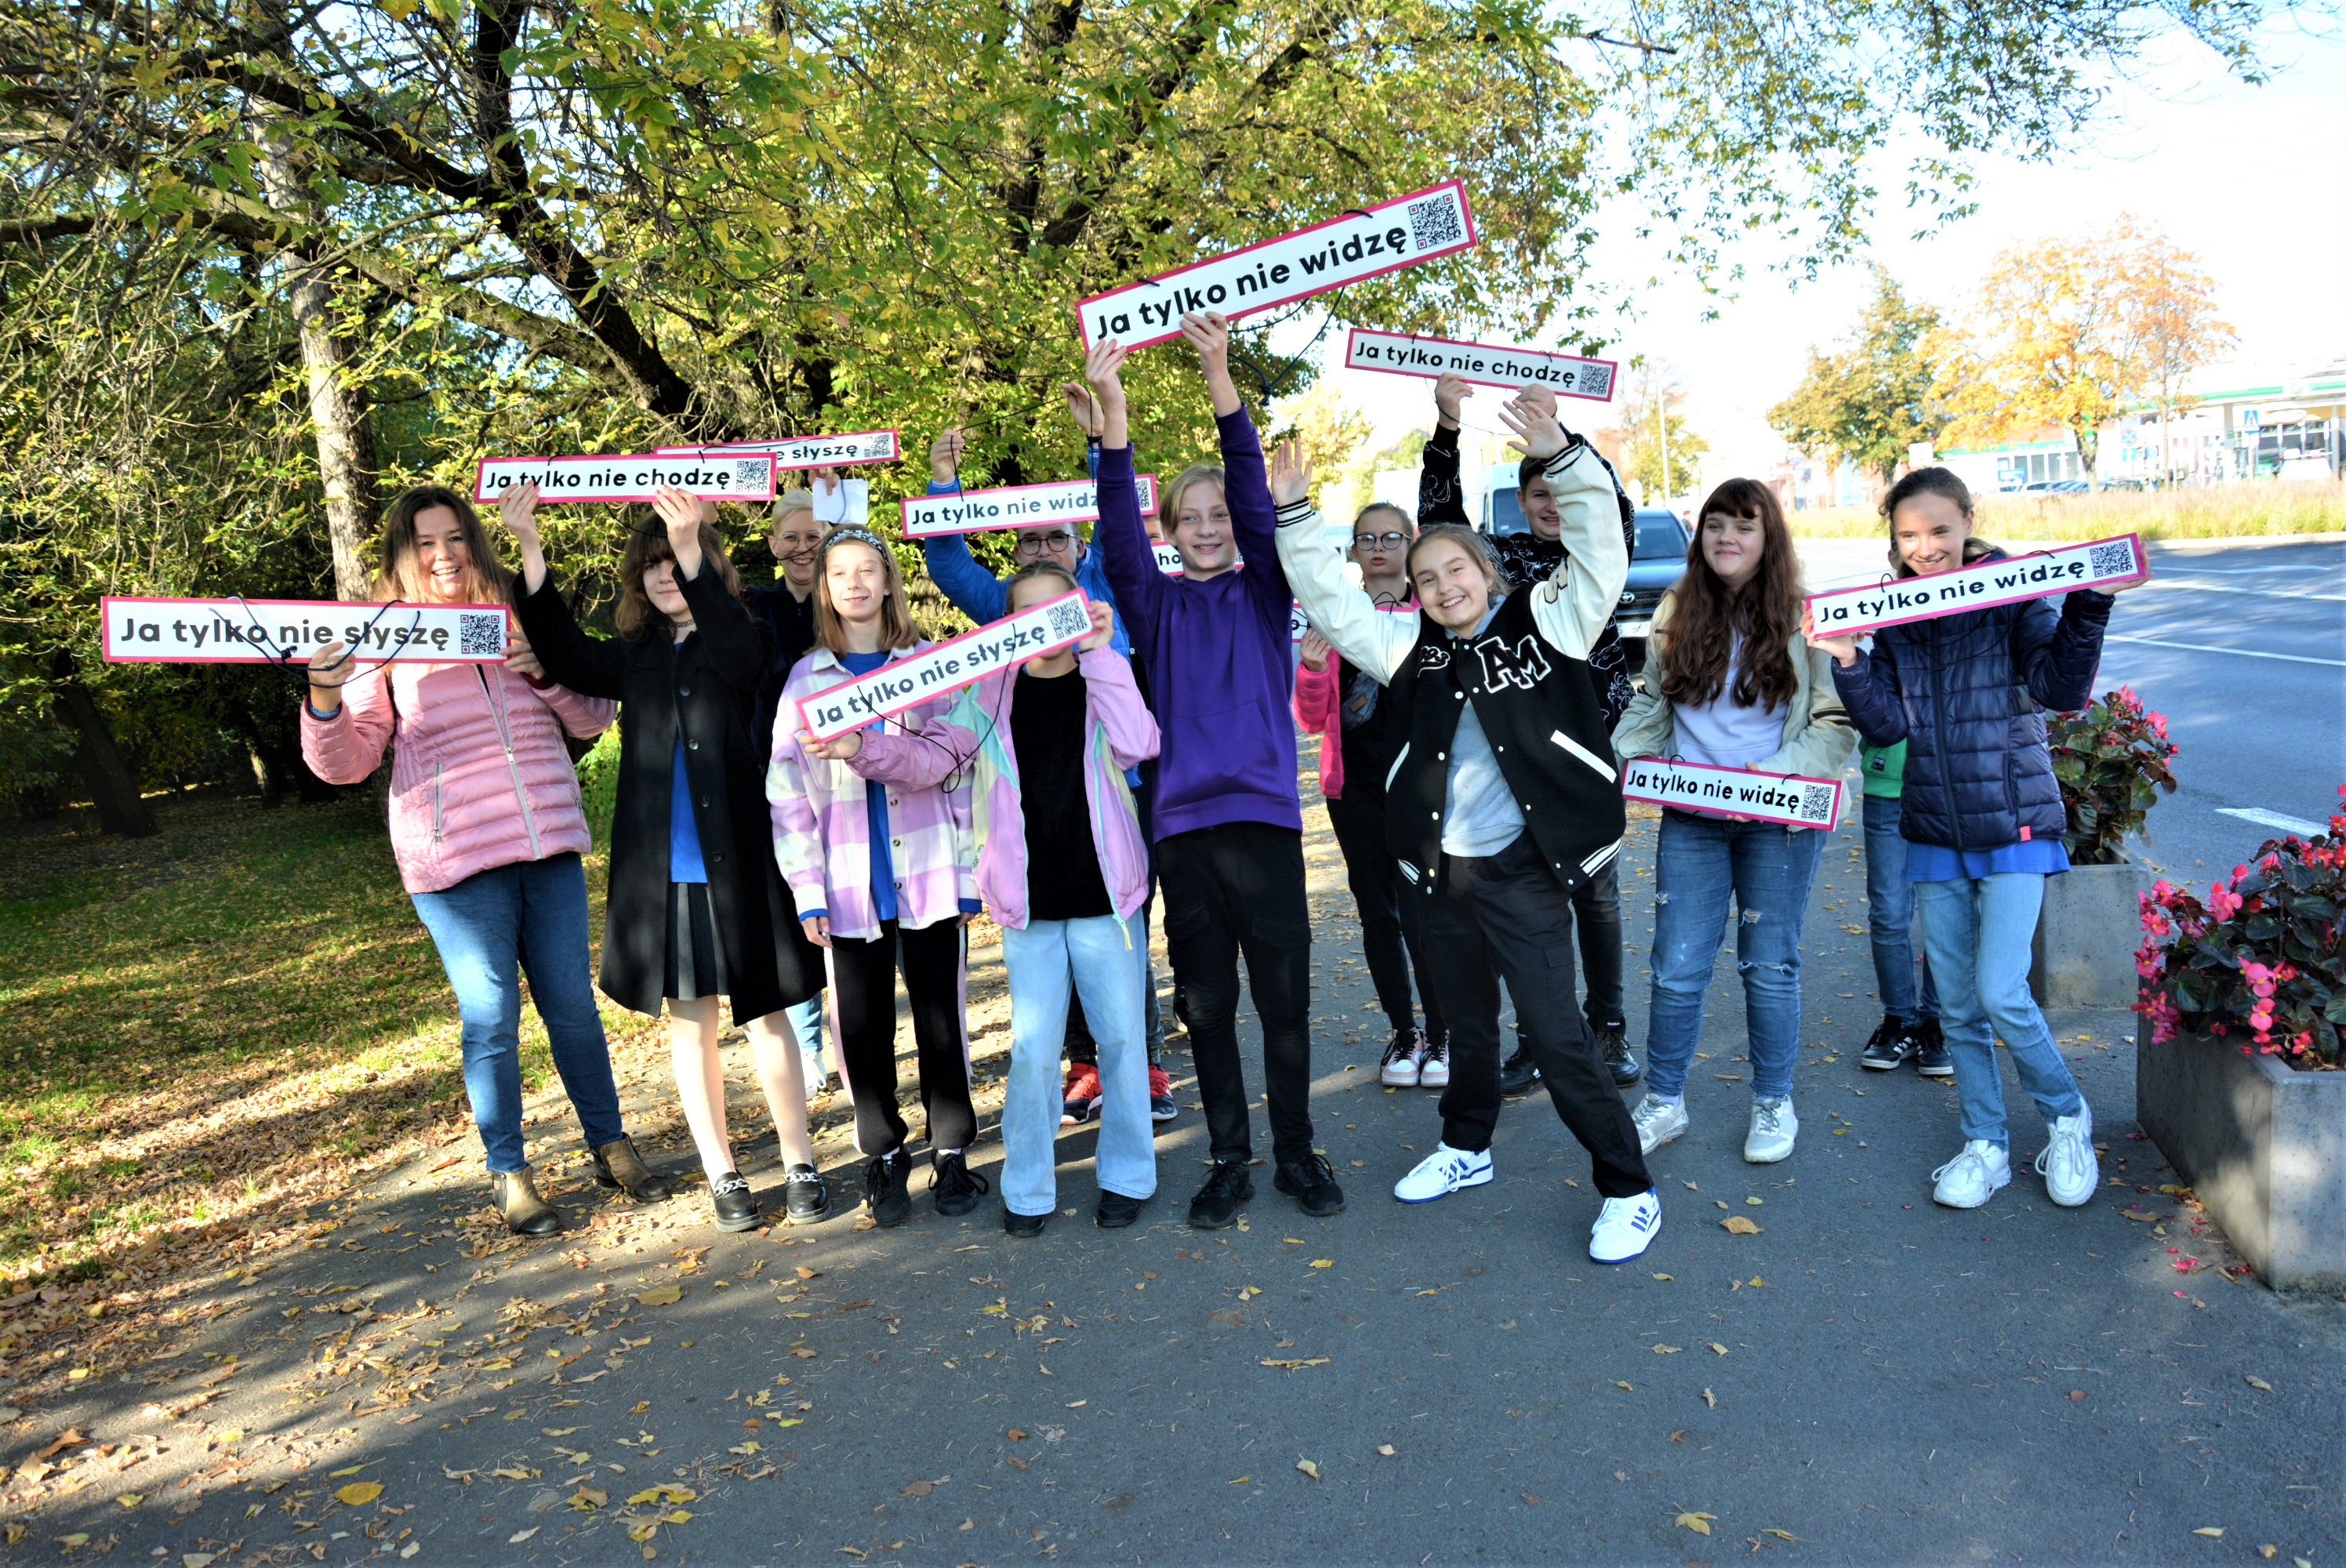 Campaign photo - young people with signs about the project